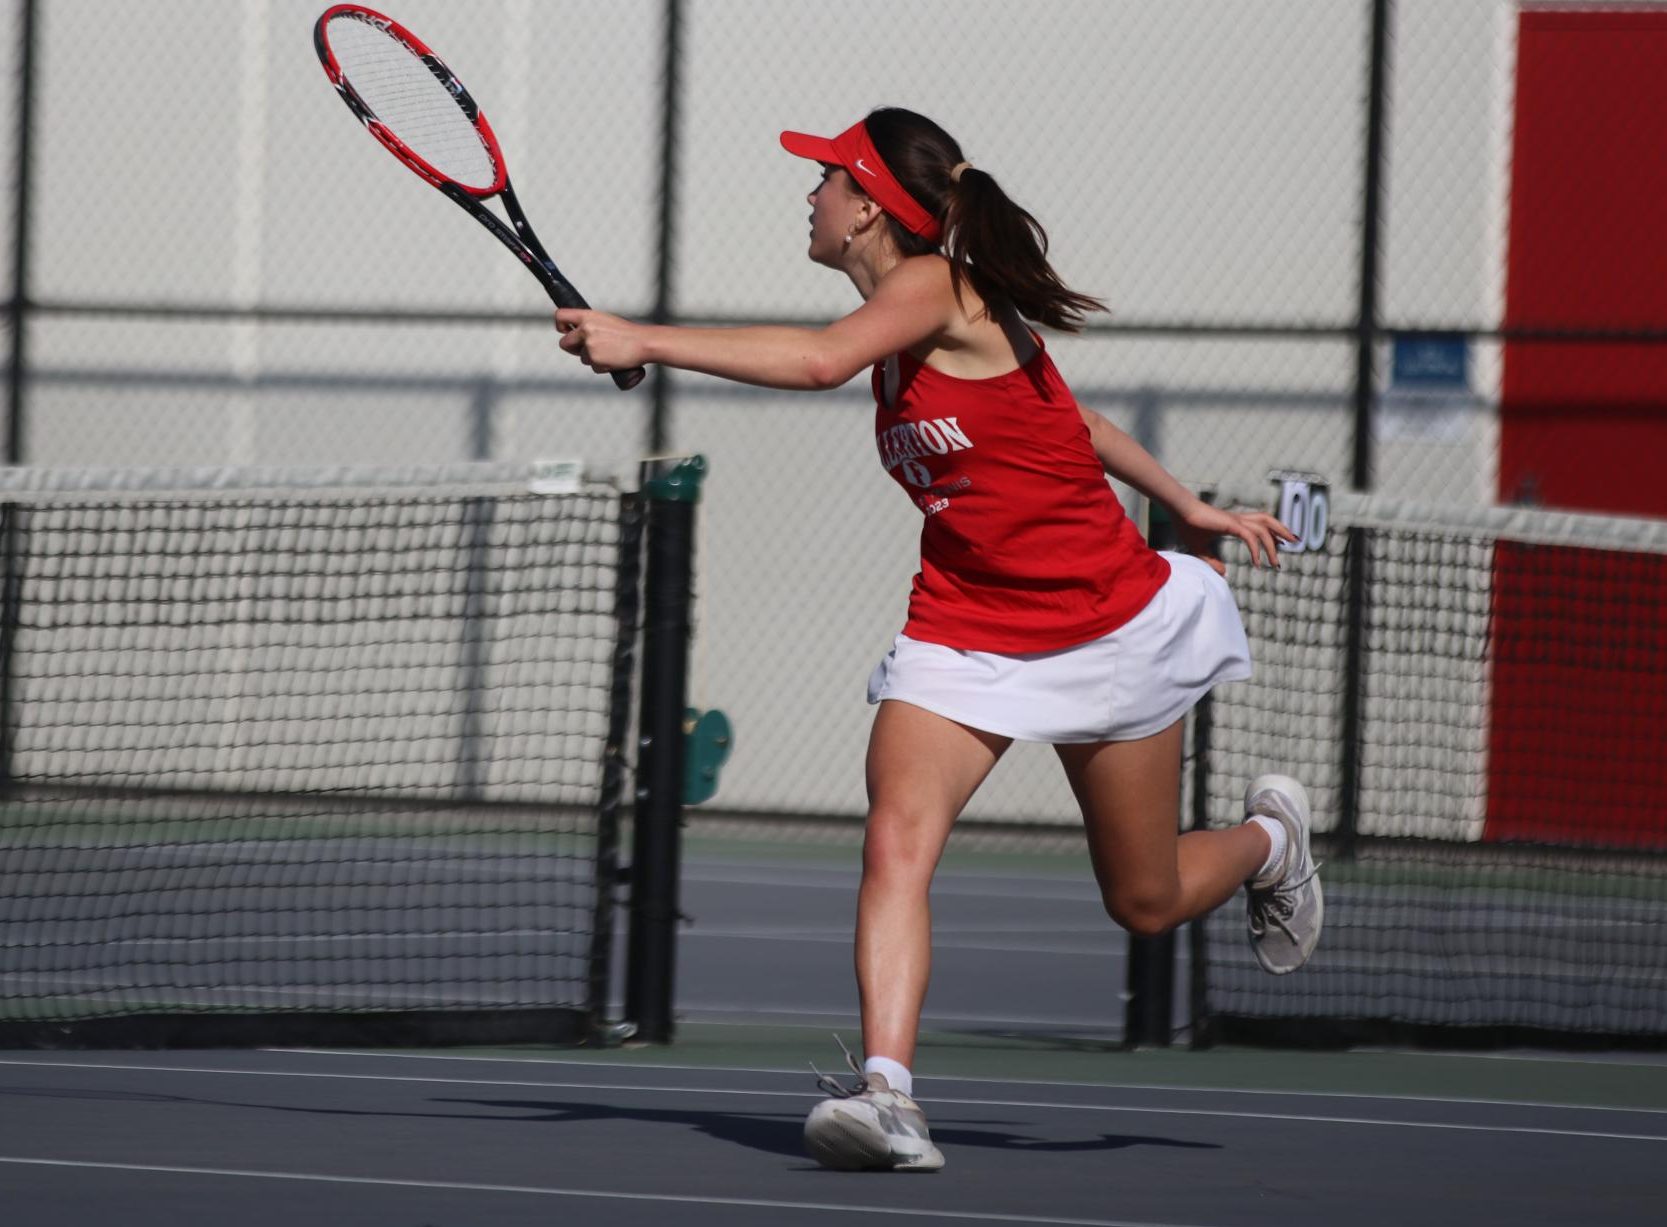 The girls tennis team lost 10-8 in its second round CIF match against Cate High School. However, senior Christina Sfatcu (pictured) and doubles partner junior Rebecca Balarie will advance to the next round. Sfatcu and Balarie are scheduled to play on Nov. 20. 